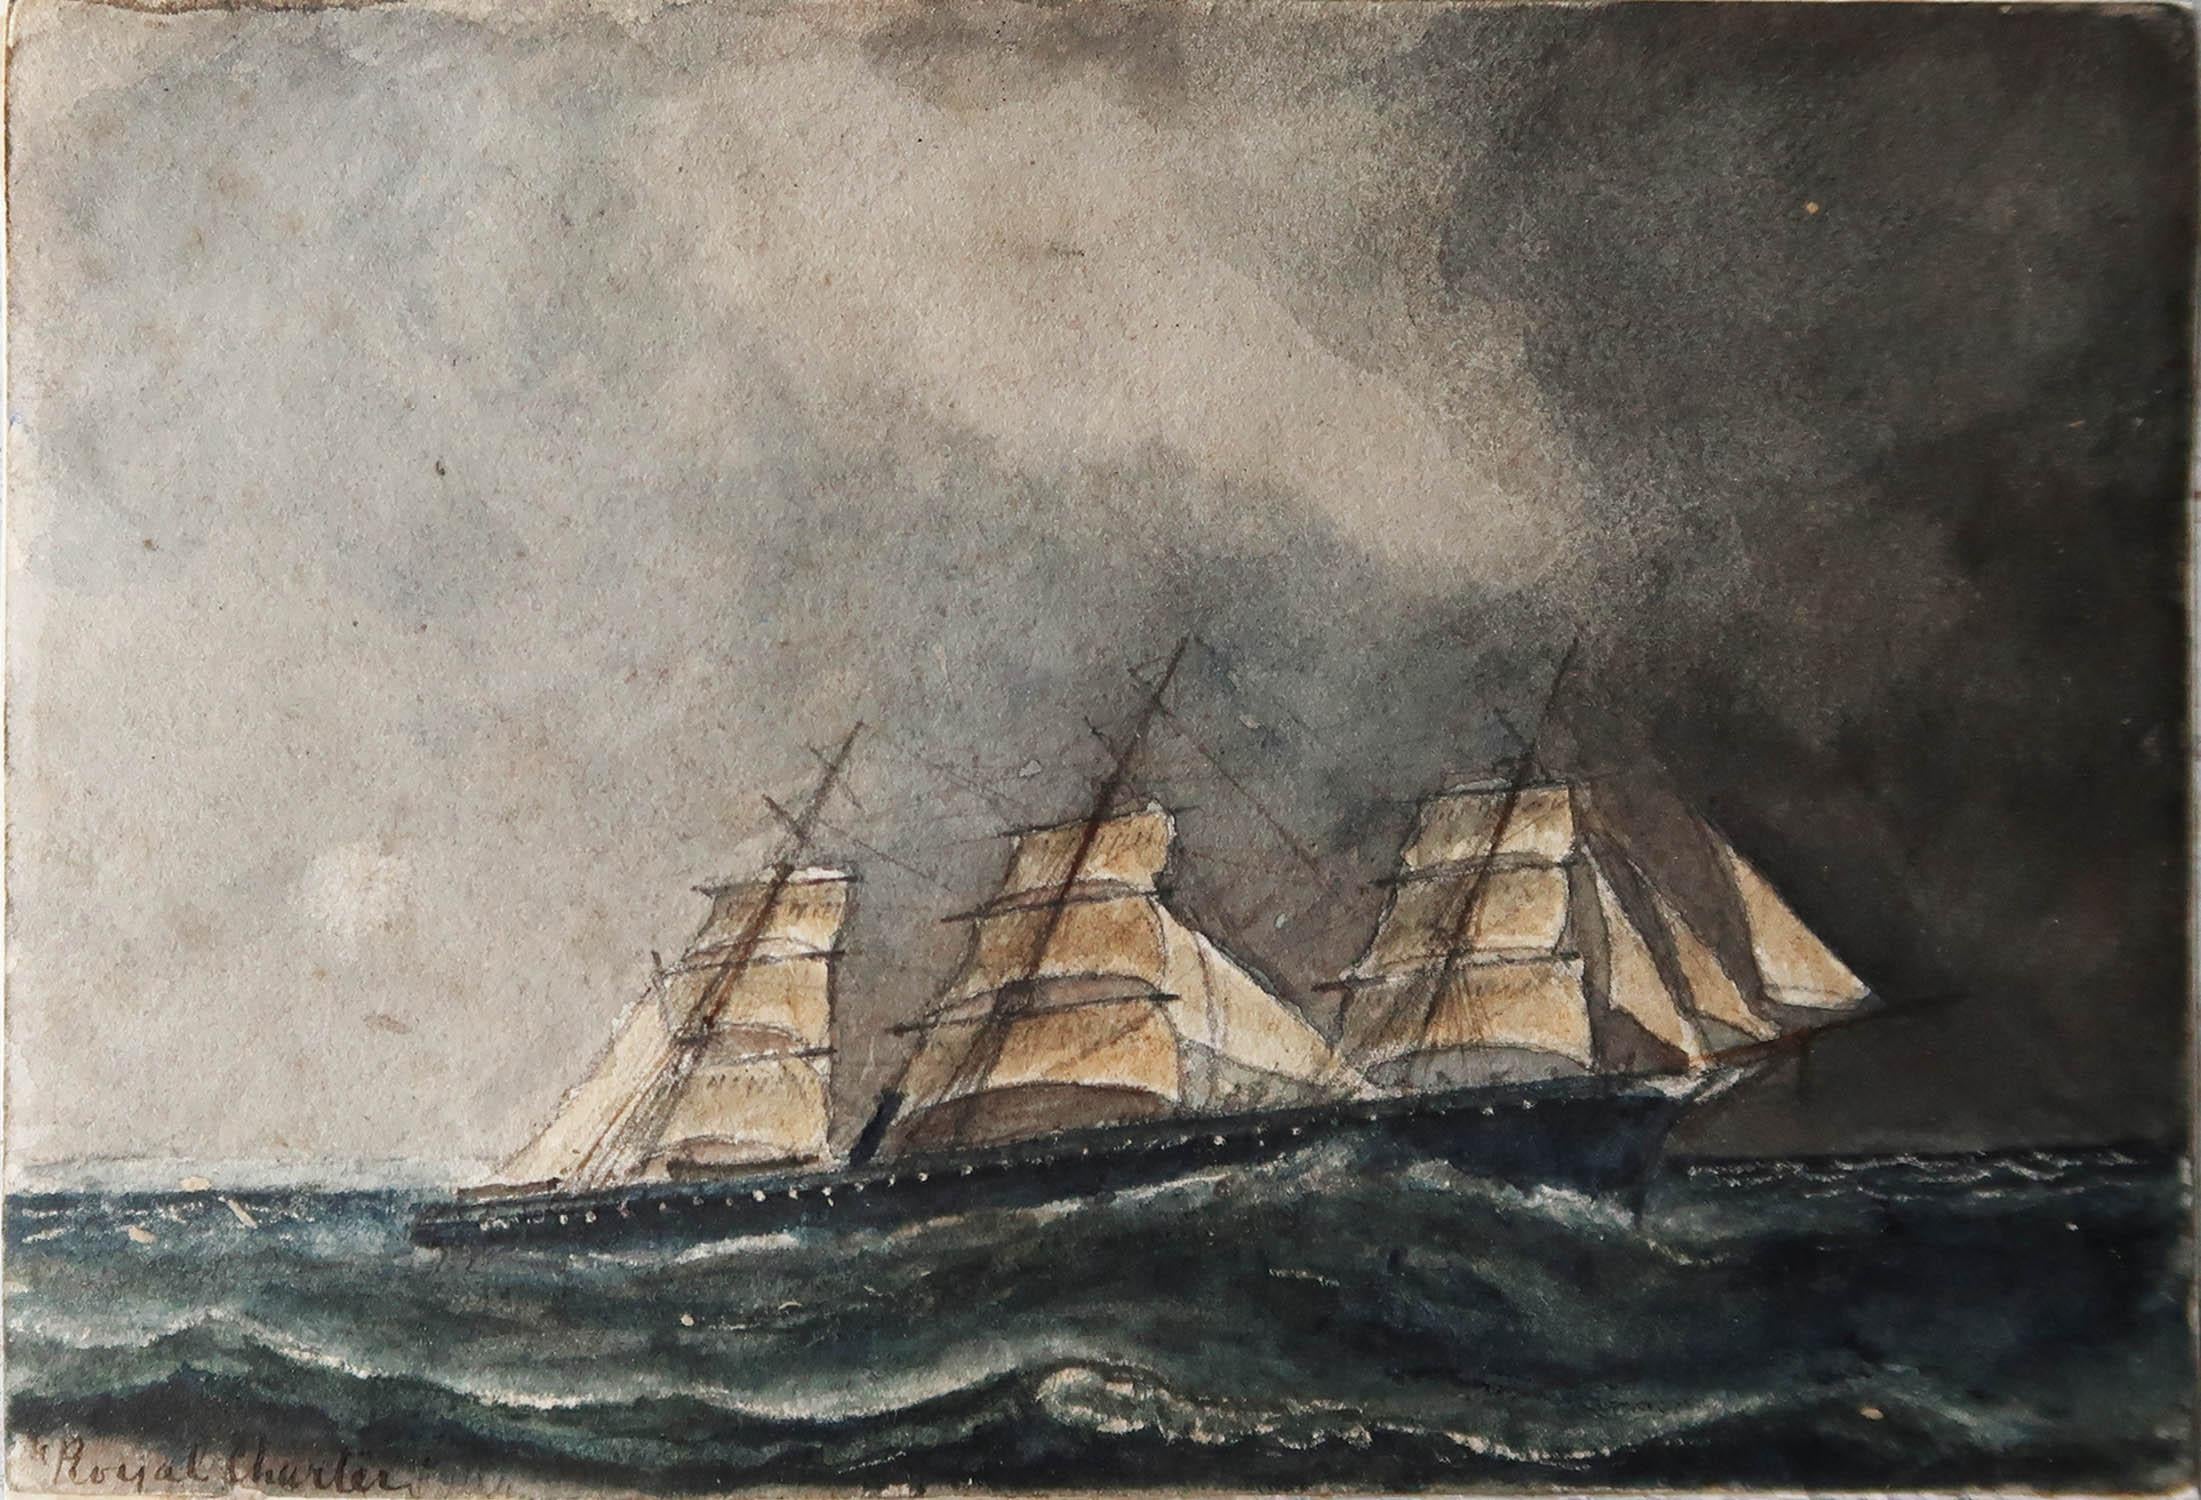 A great watercolor of H.M.S Royal Charles in a stormy sea

by Edwin Landseer Grundy*. Provenance- From an album of drawings by the artist

On paper applied to paper

Unsigned. Inscribed title lower left

Unframed

B. Manchester.